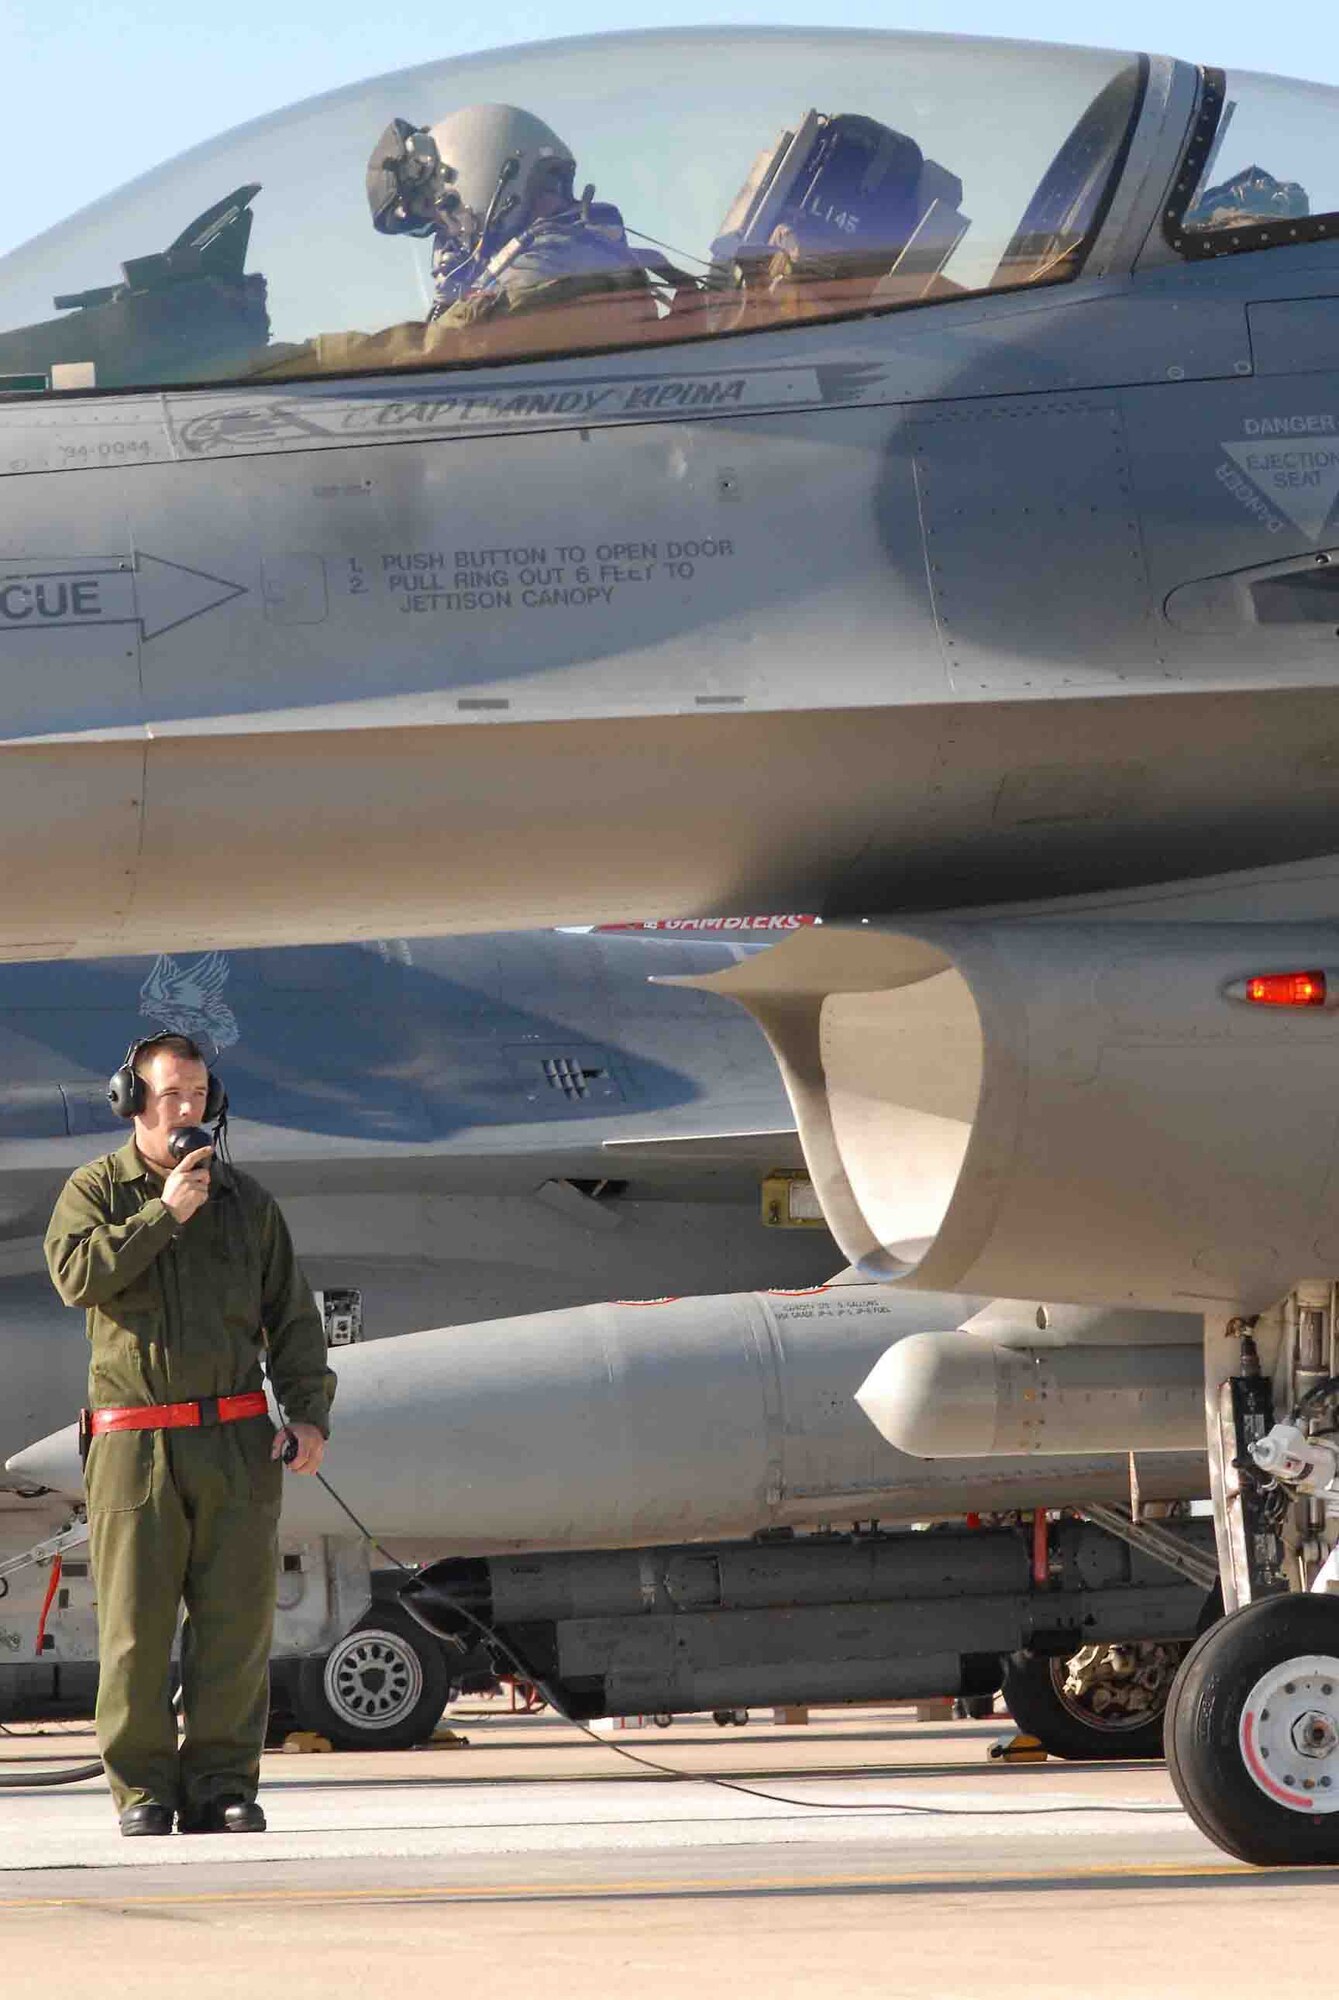 SHAW AIR FORCE BASE, S.C. -- Staff Sgt. Donald Slayton, 77th Fighter Squadron crew chief, performs a pre-flight inspection before launching an F-16CJ during the Operation Iron Thunder exercise Feb. 7. The four-day exercise prepares pilots for future contingency operations by exposing them to missions identical to those faced in combat. (U.S. Air Force Photo/Tech. Sgt. James Arrowood)